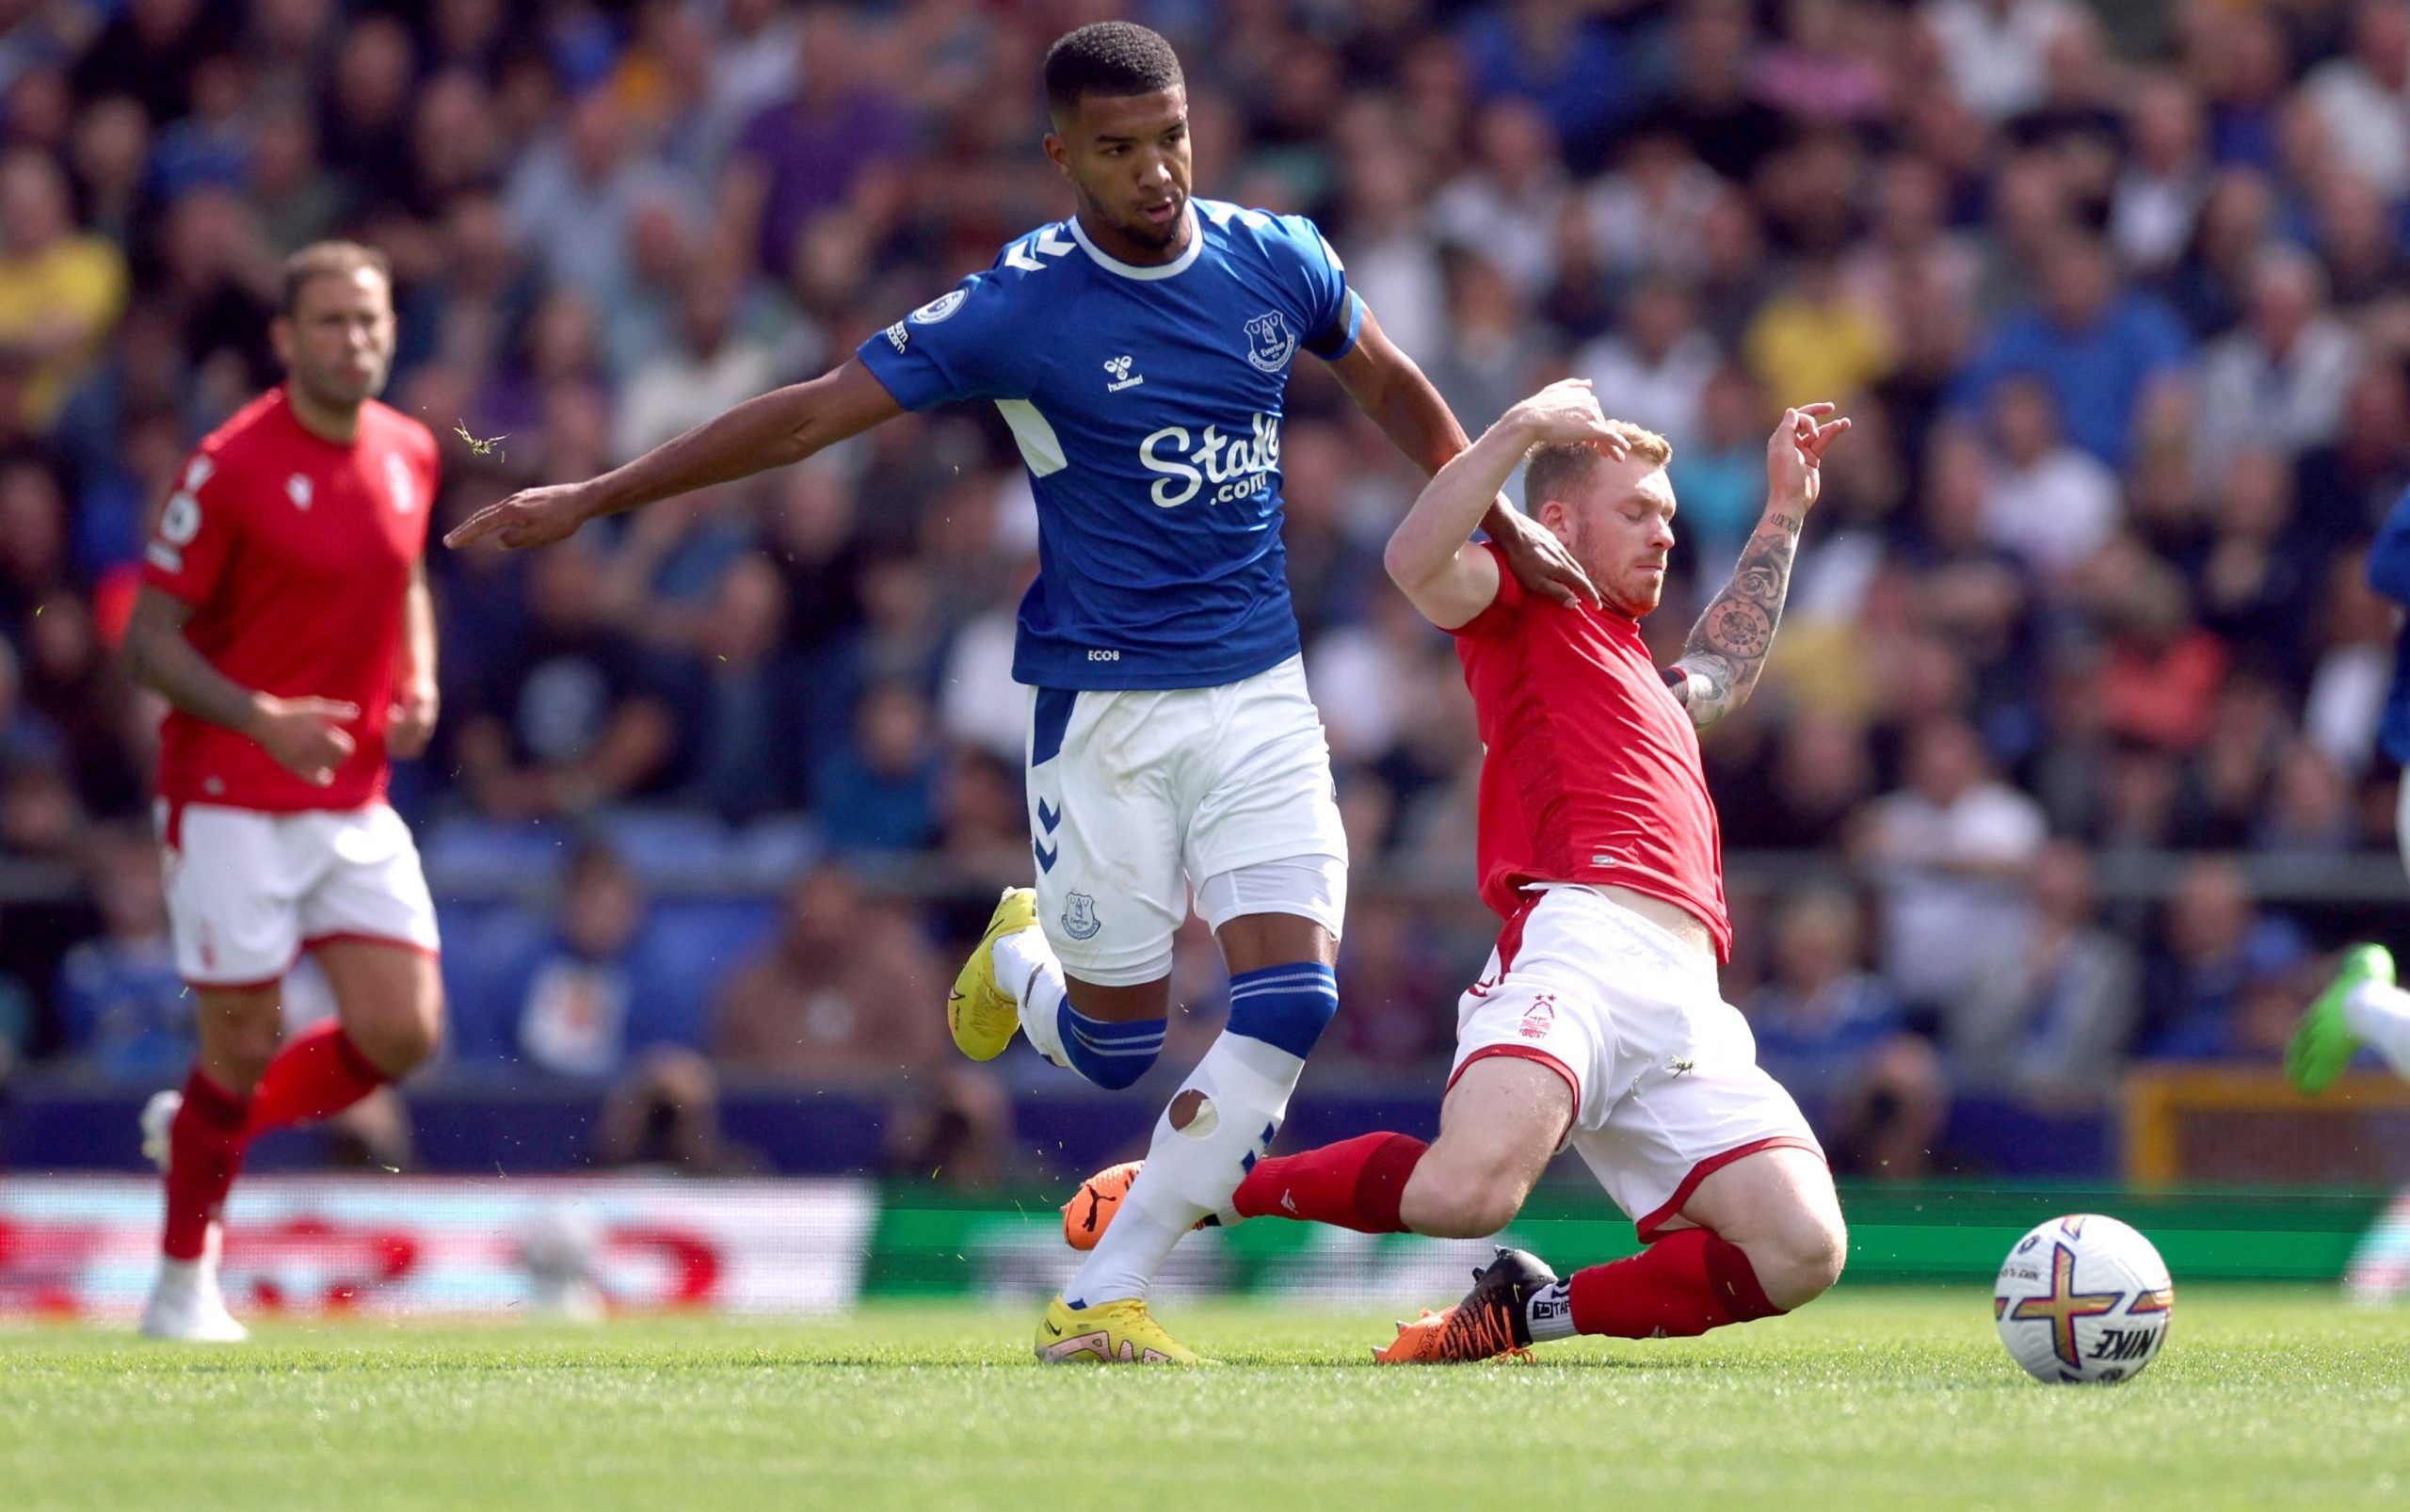 Soccer Football - Premier League - Everton v Nottingham Forest - Goodison Park, Liverpool, Britain - August 20, 2022 Everton's Mason Holgate in action with Nottingham Forest's Lewis O'Brien Action Images via Reuters/Lee Smith EDITORIAL USE ONLY. No use with unauthorized audio, video, data, fixture lists, club/league logos or 'live' services. Online in-match use limited to 75 images, no video emulation. No use in betting, games or single club /league/player publications.  Please contact your acco